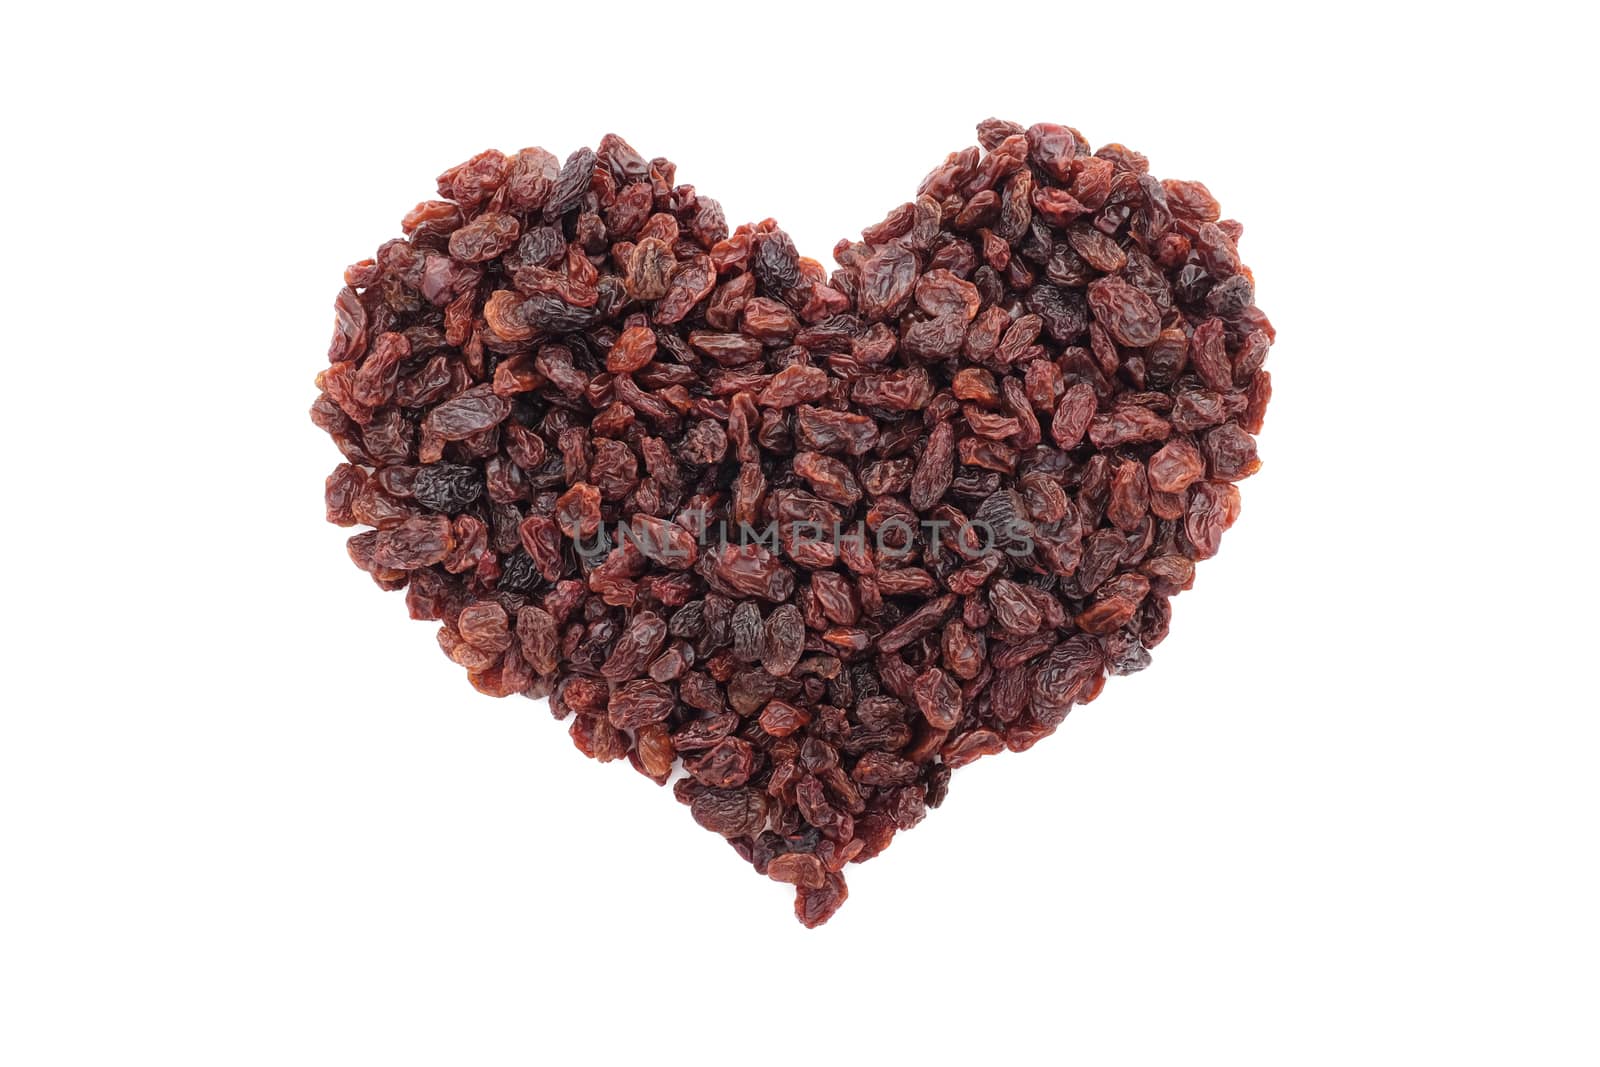 Raisins in a heart shape, isolated on a white background